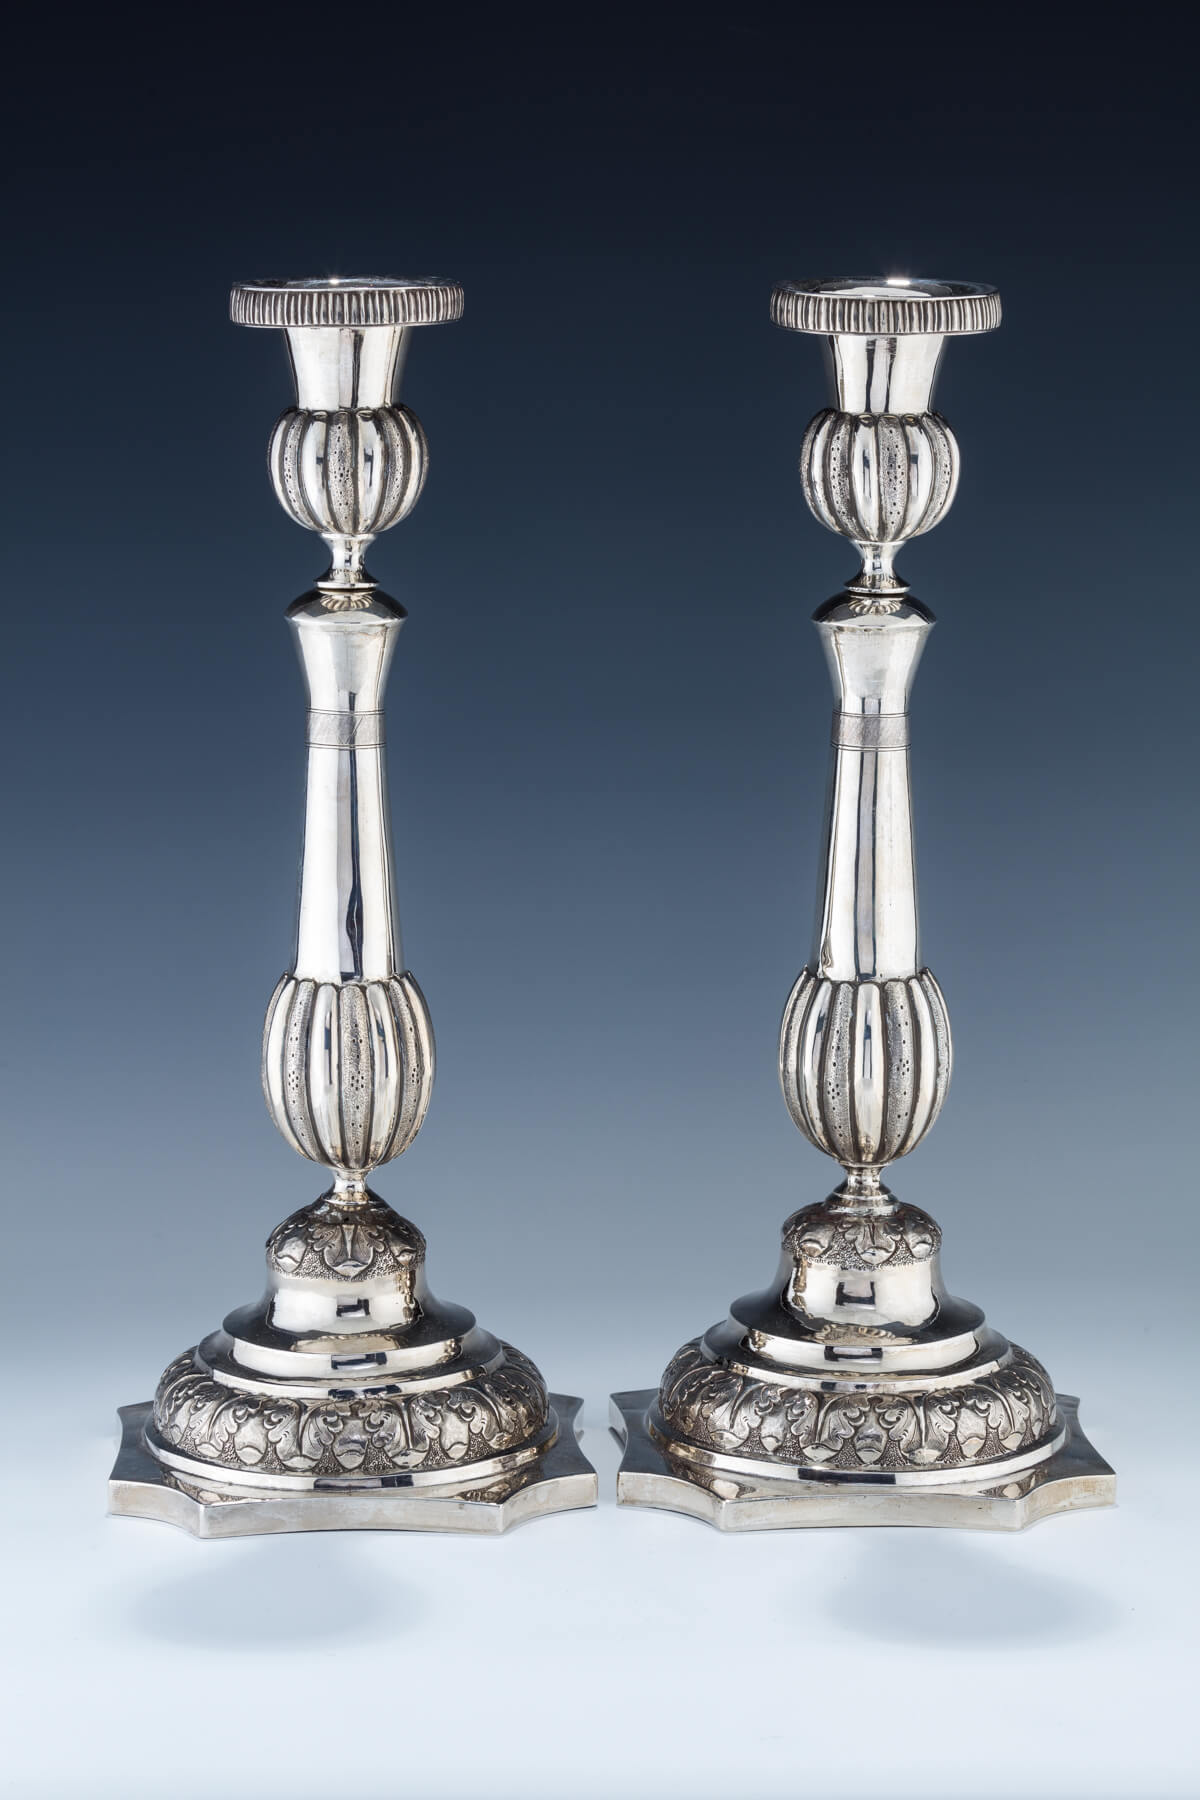 1. A Pair Of Exceptional Silver Sabbath Candlesticks By Alexander Fuld